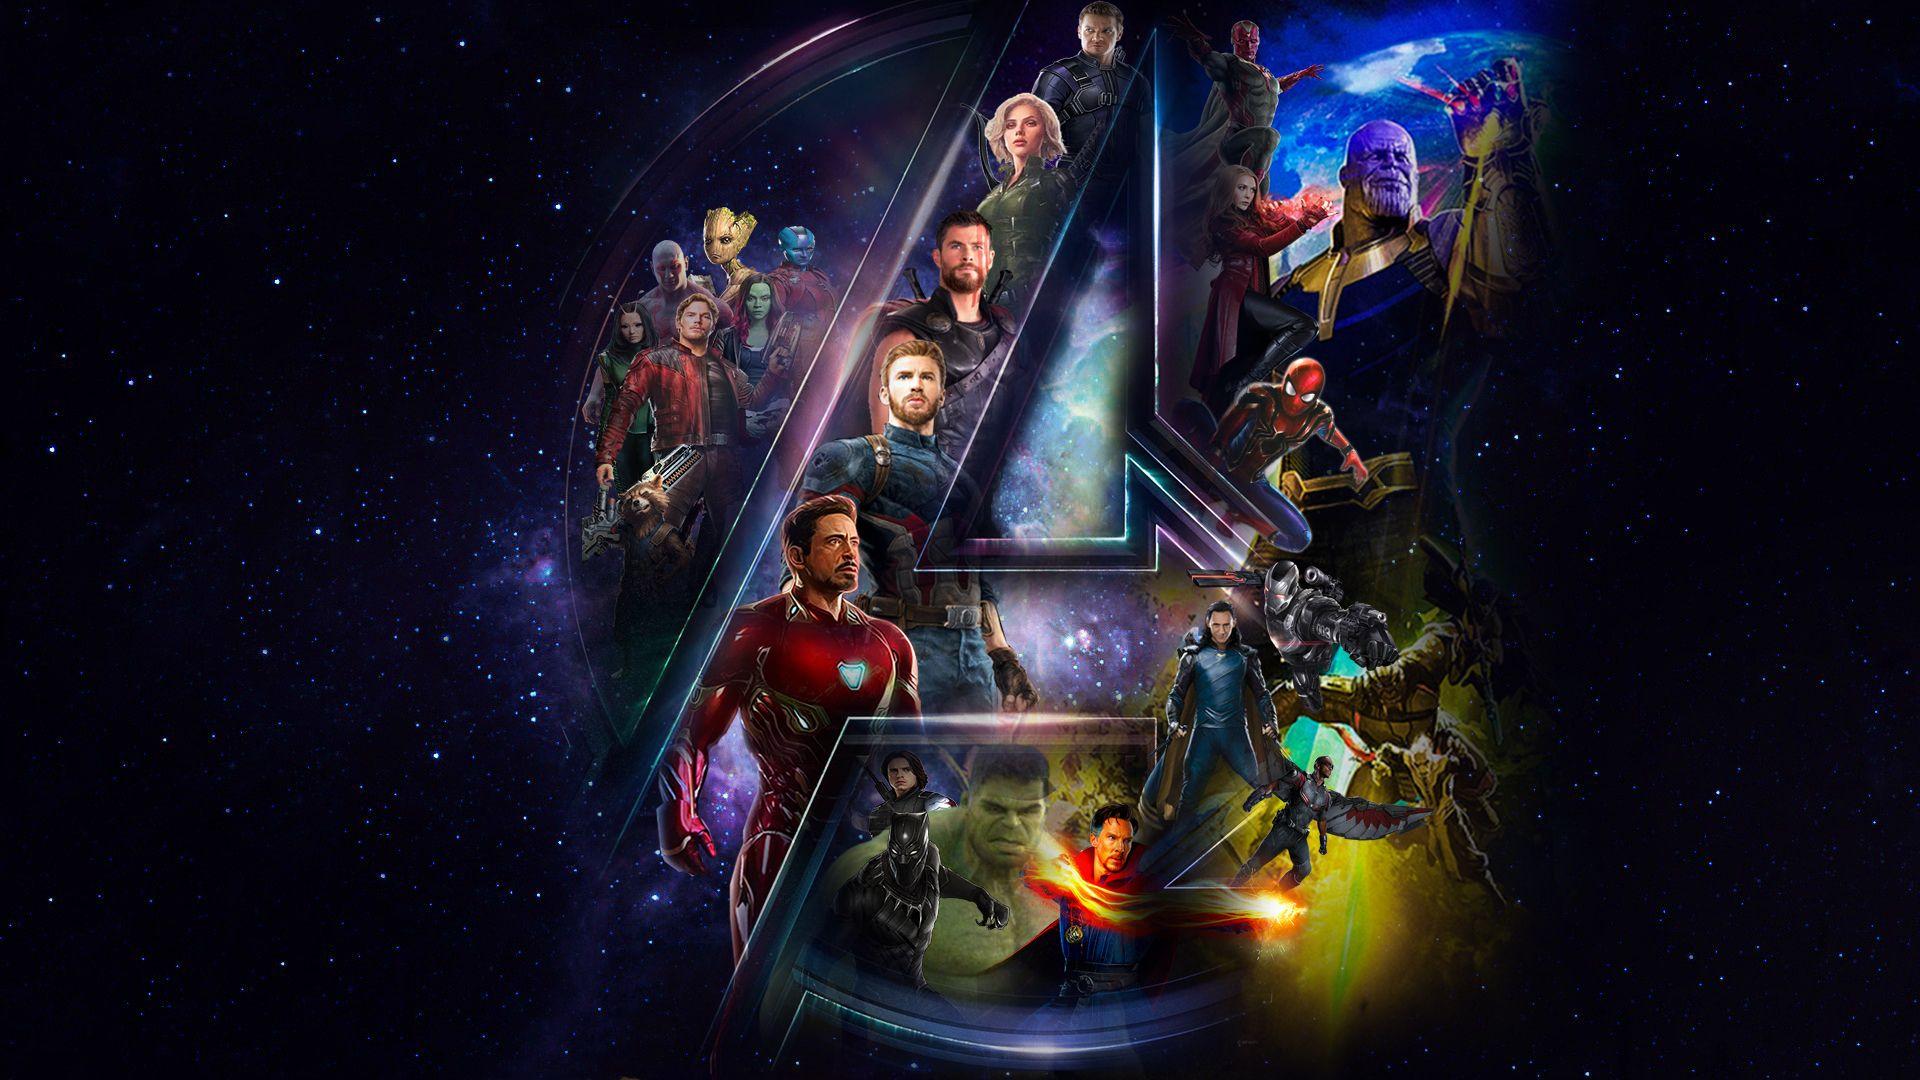 Avengers Infinty War Star Cast And Logo 1680x1050 Resolution Wallpaper, HD Movies 4K Wallpaper, Image, Photo and Background